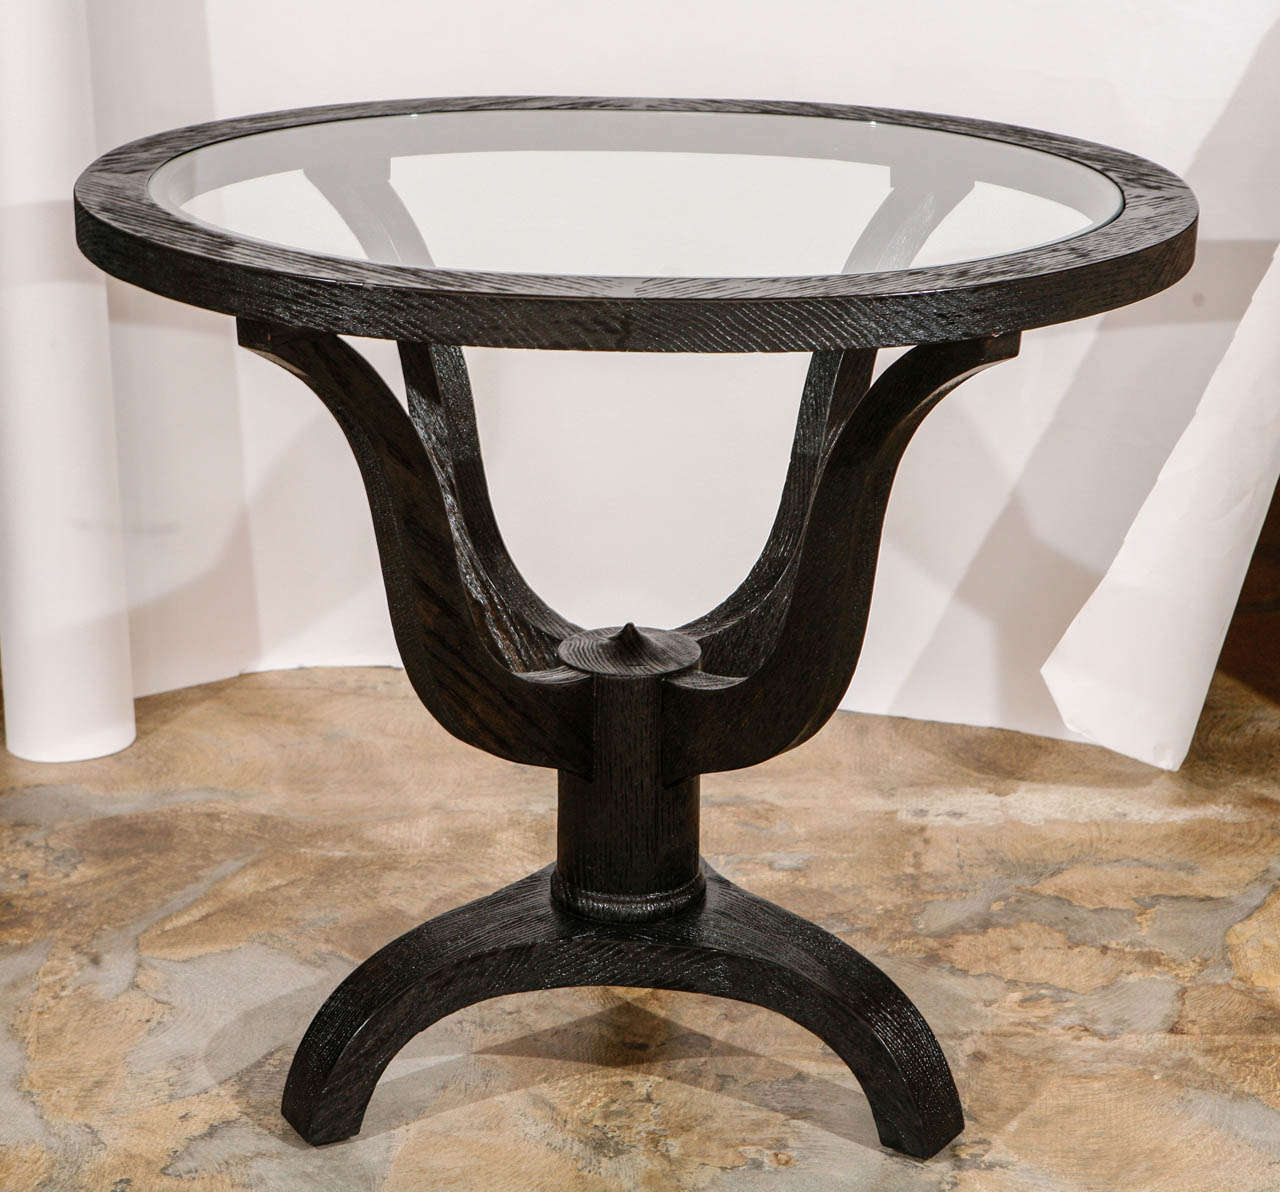 Larger oval oak side table (or smaller center table) has been finished in distressed ebony and with inset glass top.